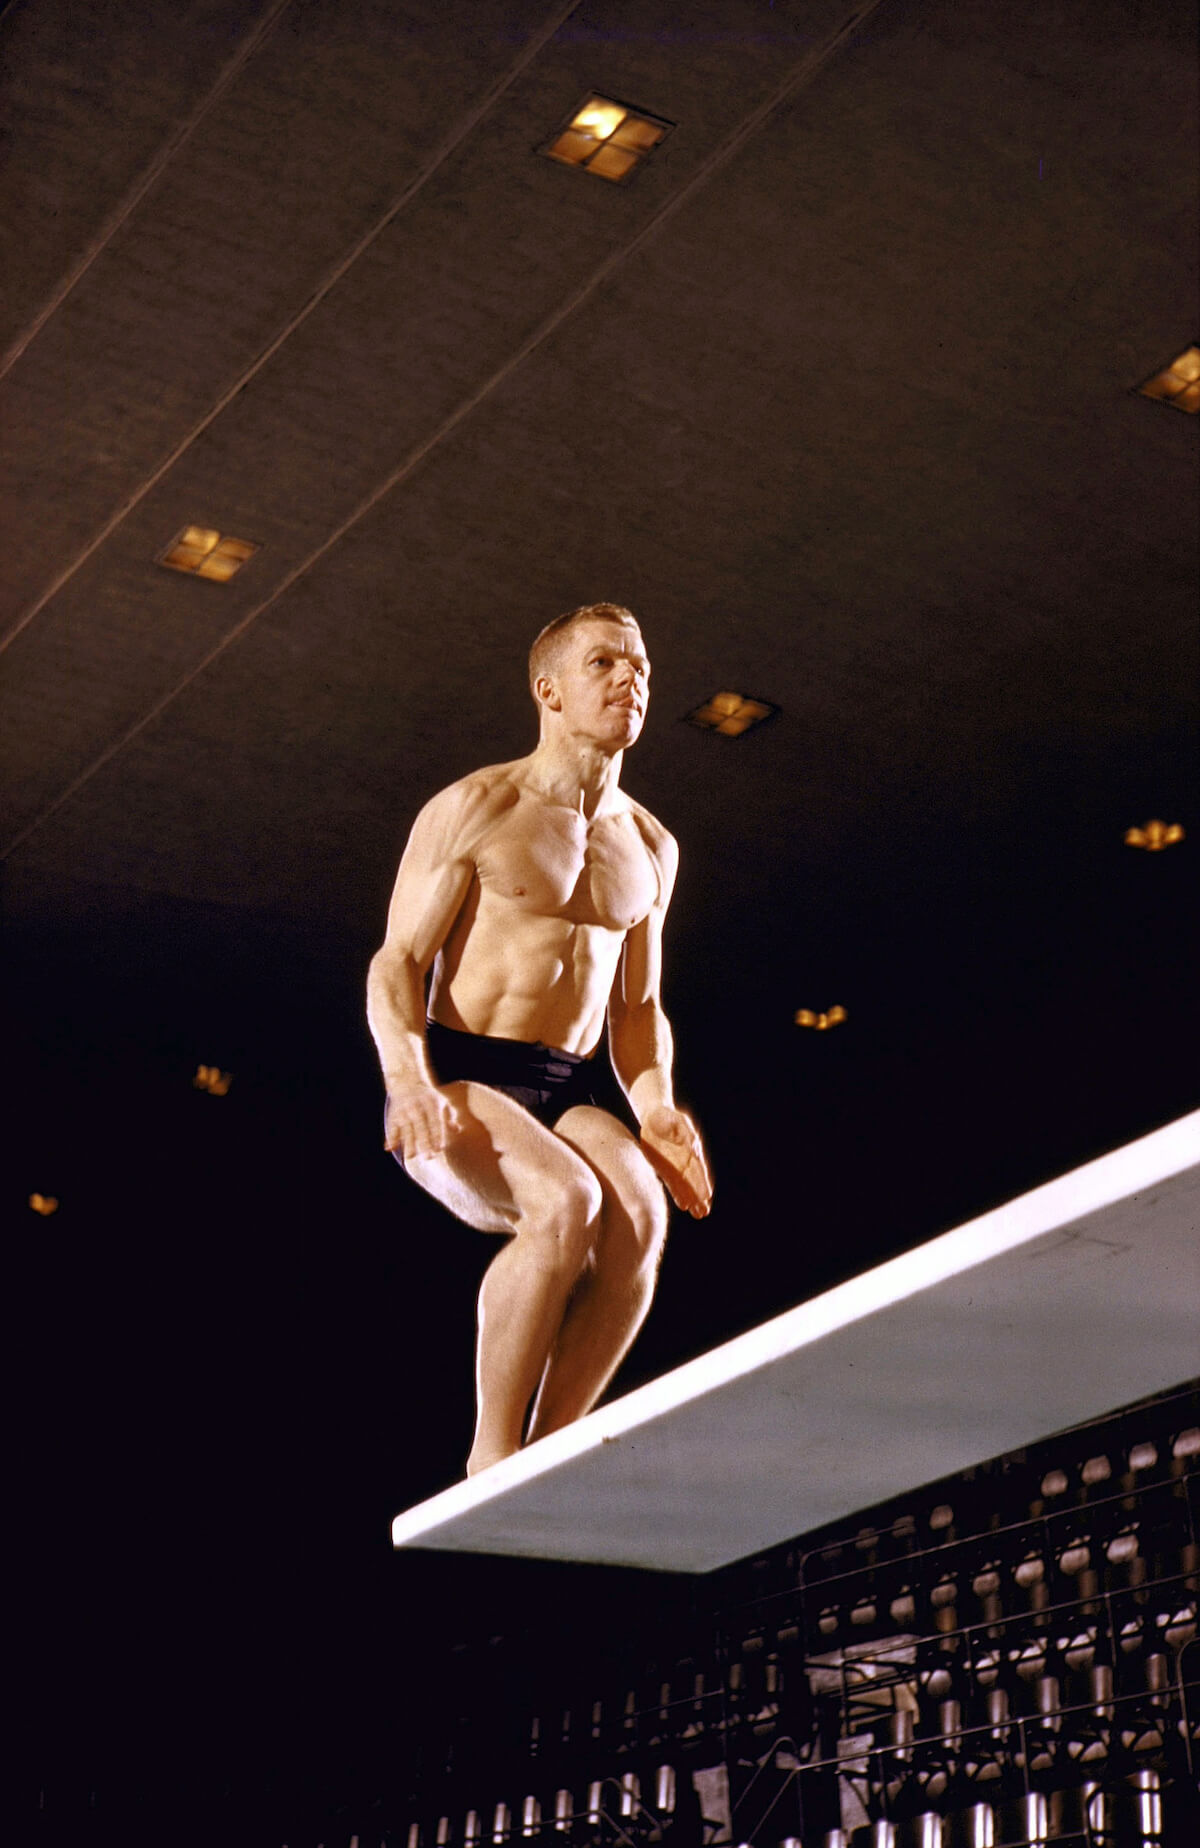 Diving: AAU Swim Meet: Bob Clotworthy in action during meet at Exhibition Pool in Payne Whitney Gymnasium on Yale University campus. New Haven, CT 4/8/1956 CREDIT: Richard Meek (Photo by Richard Meek /Sports Illustrated/Getty Images) (Set Number: X3674 )